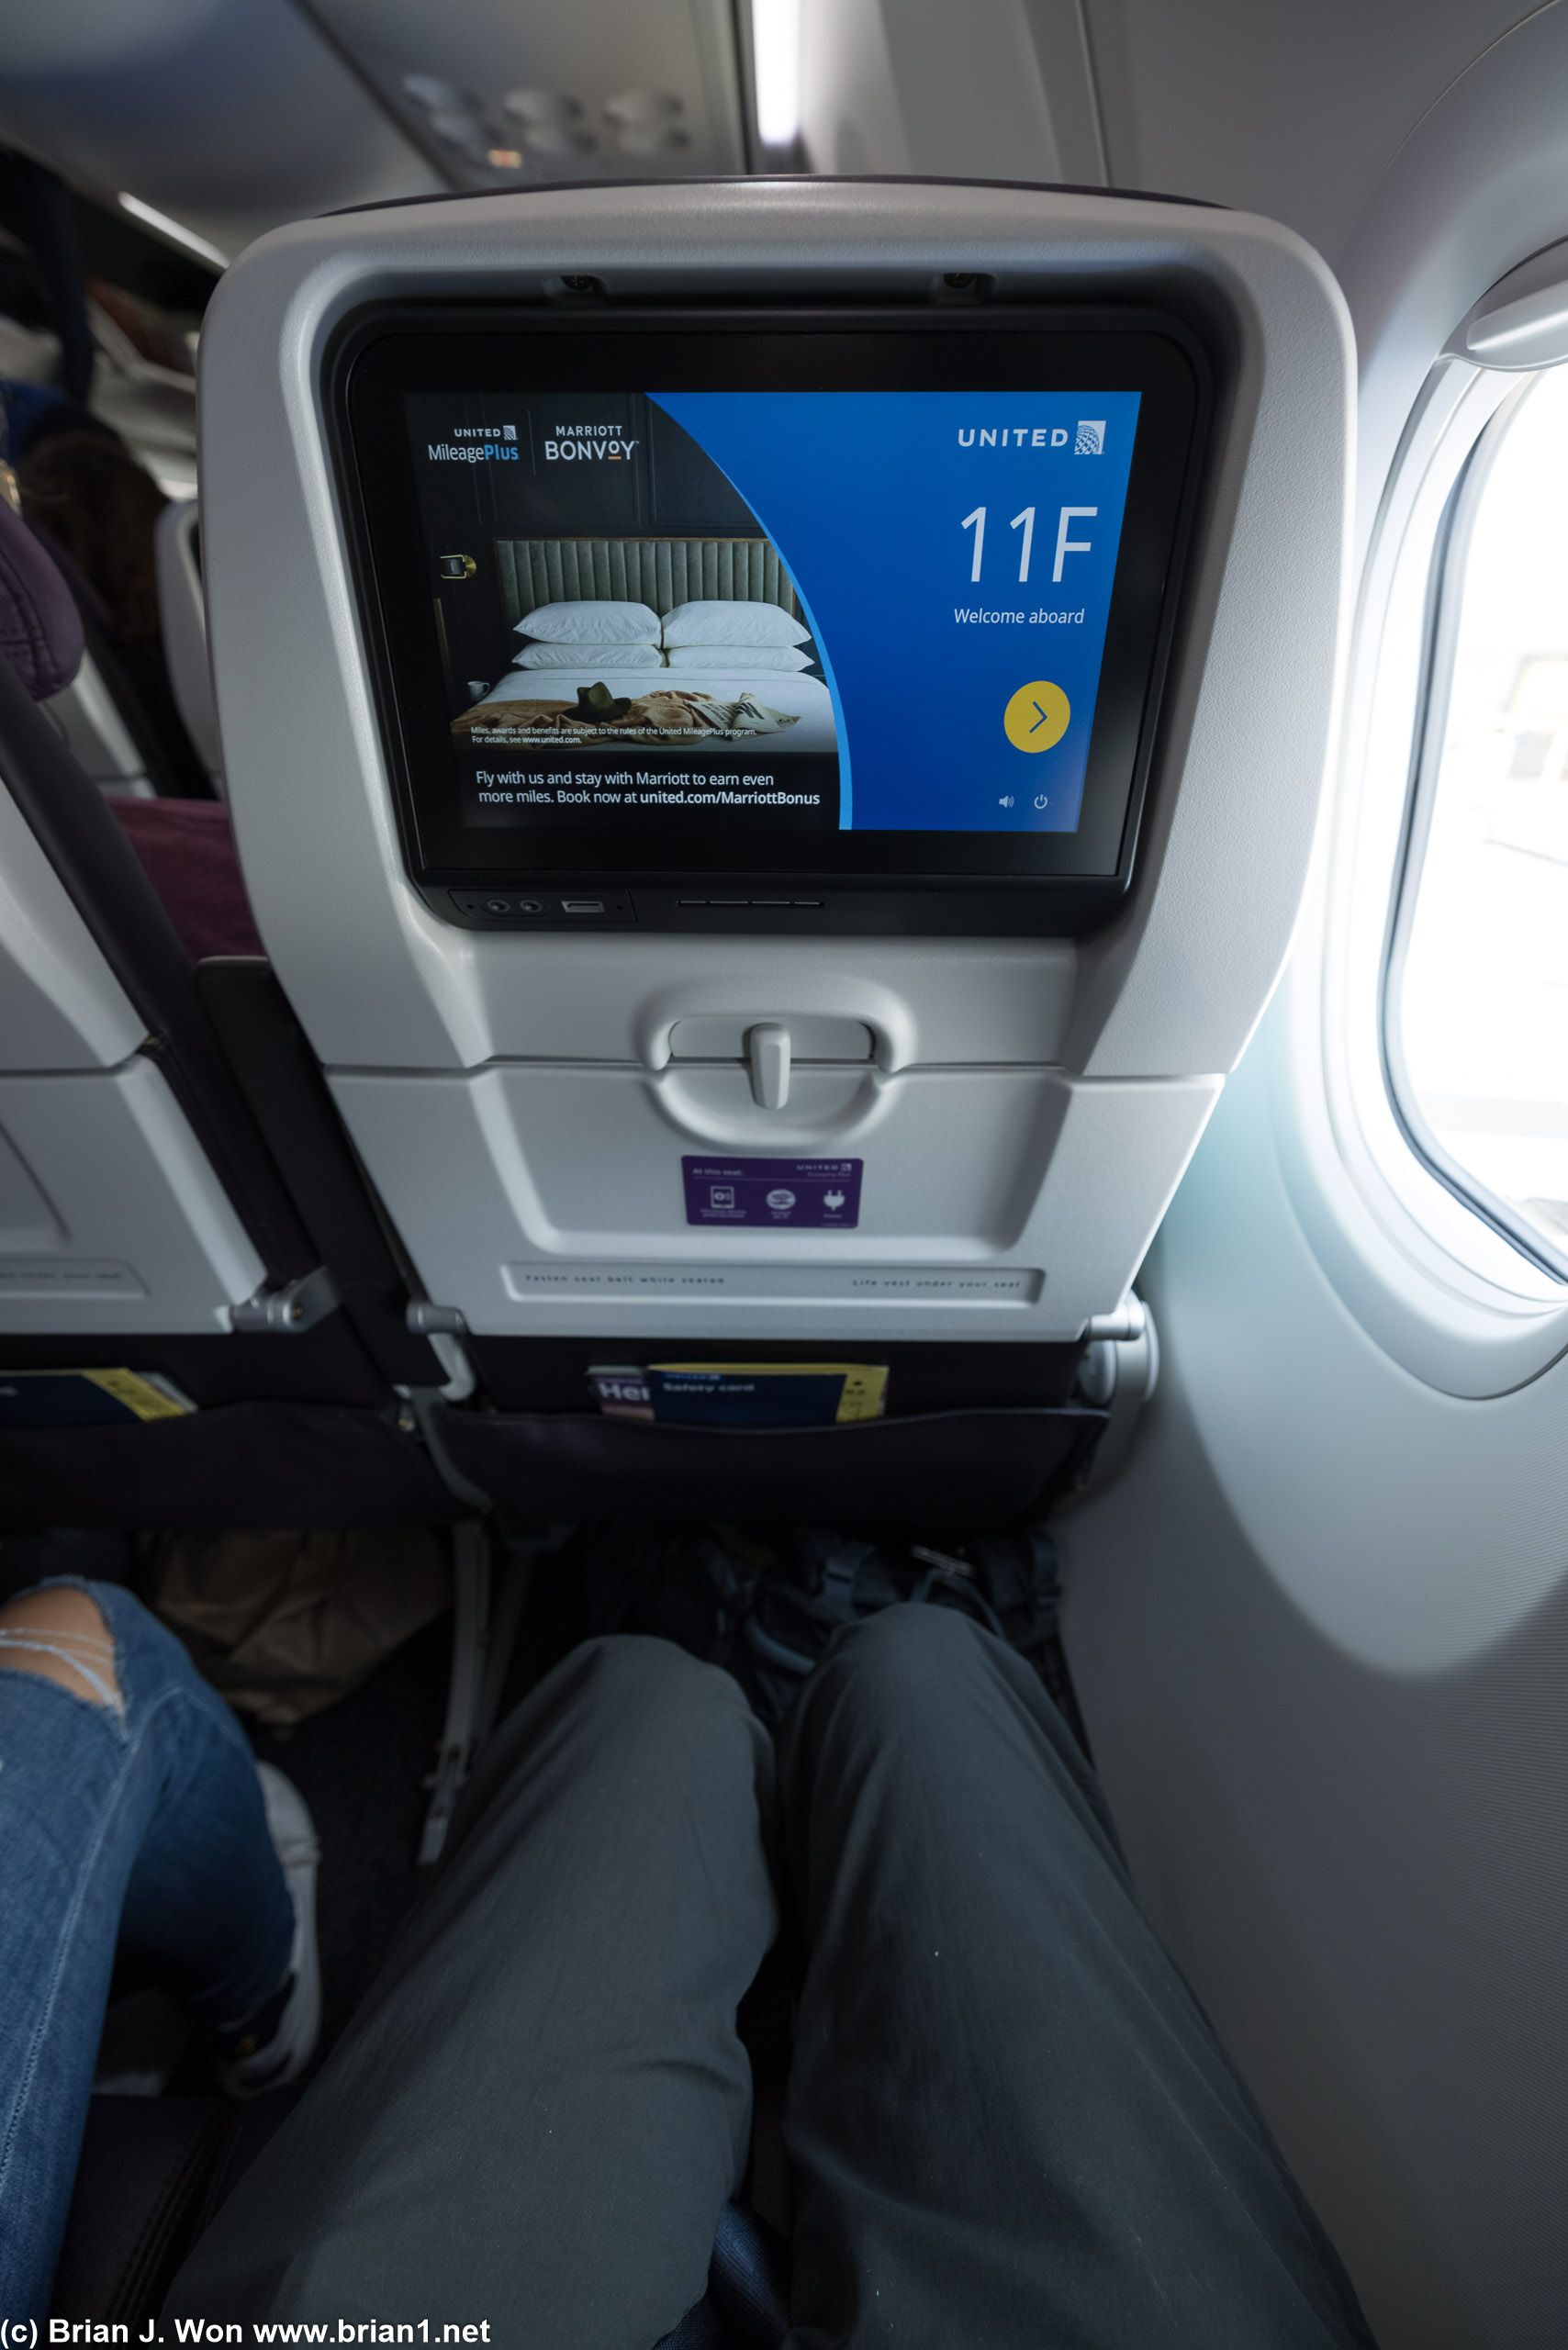 33" or so of leg room seems to be the standard for extra-legroom economy these days.